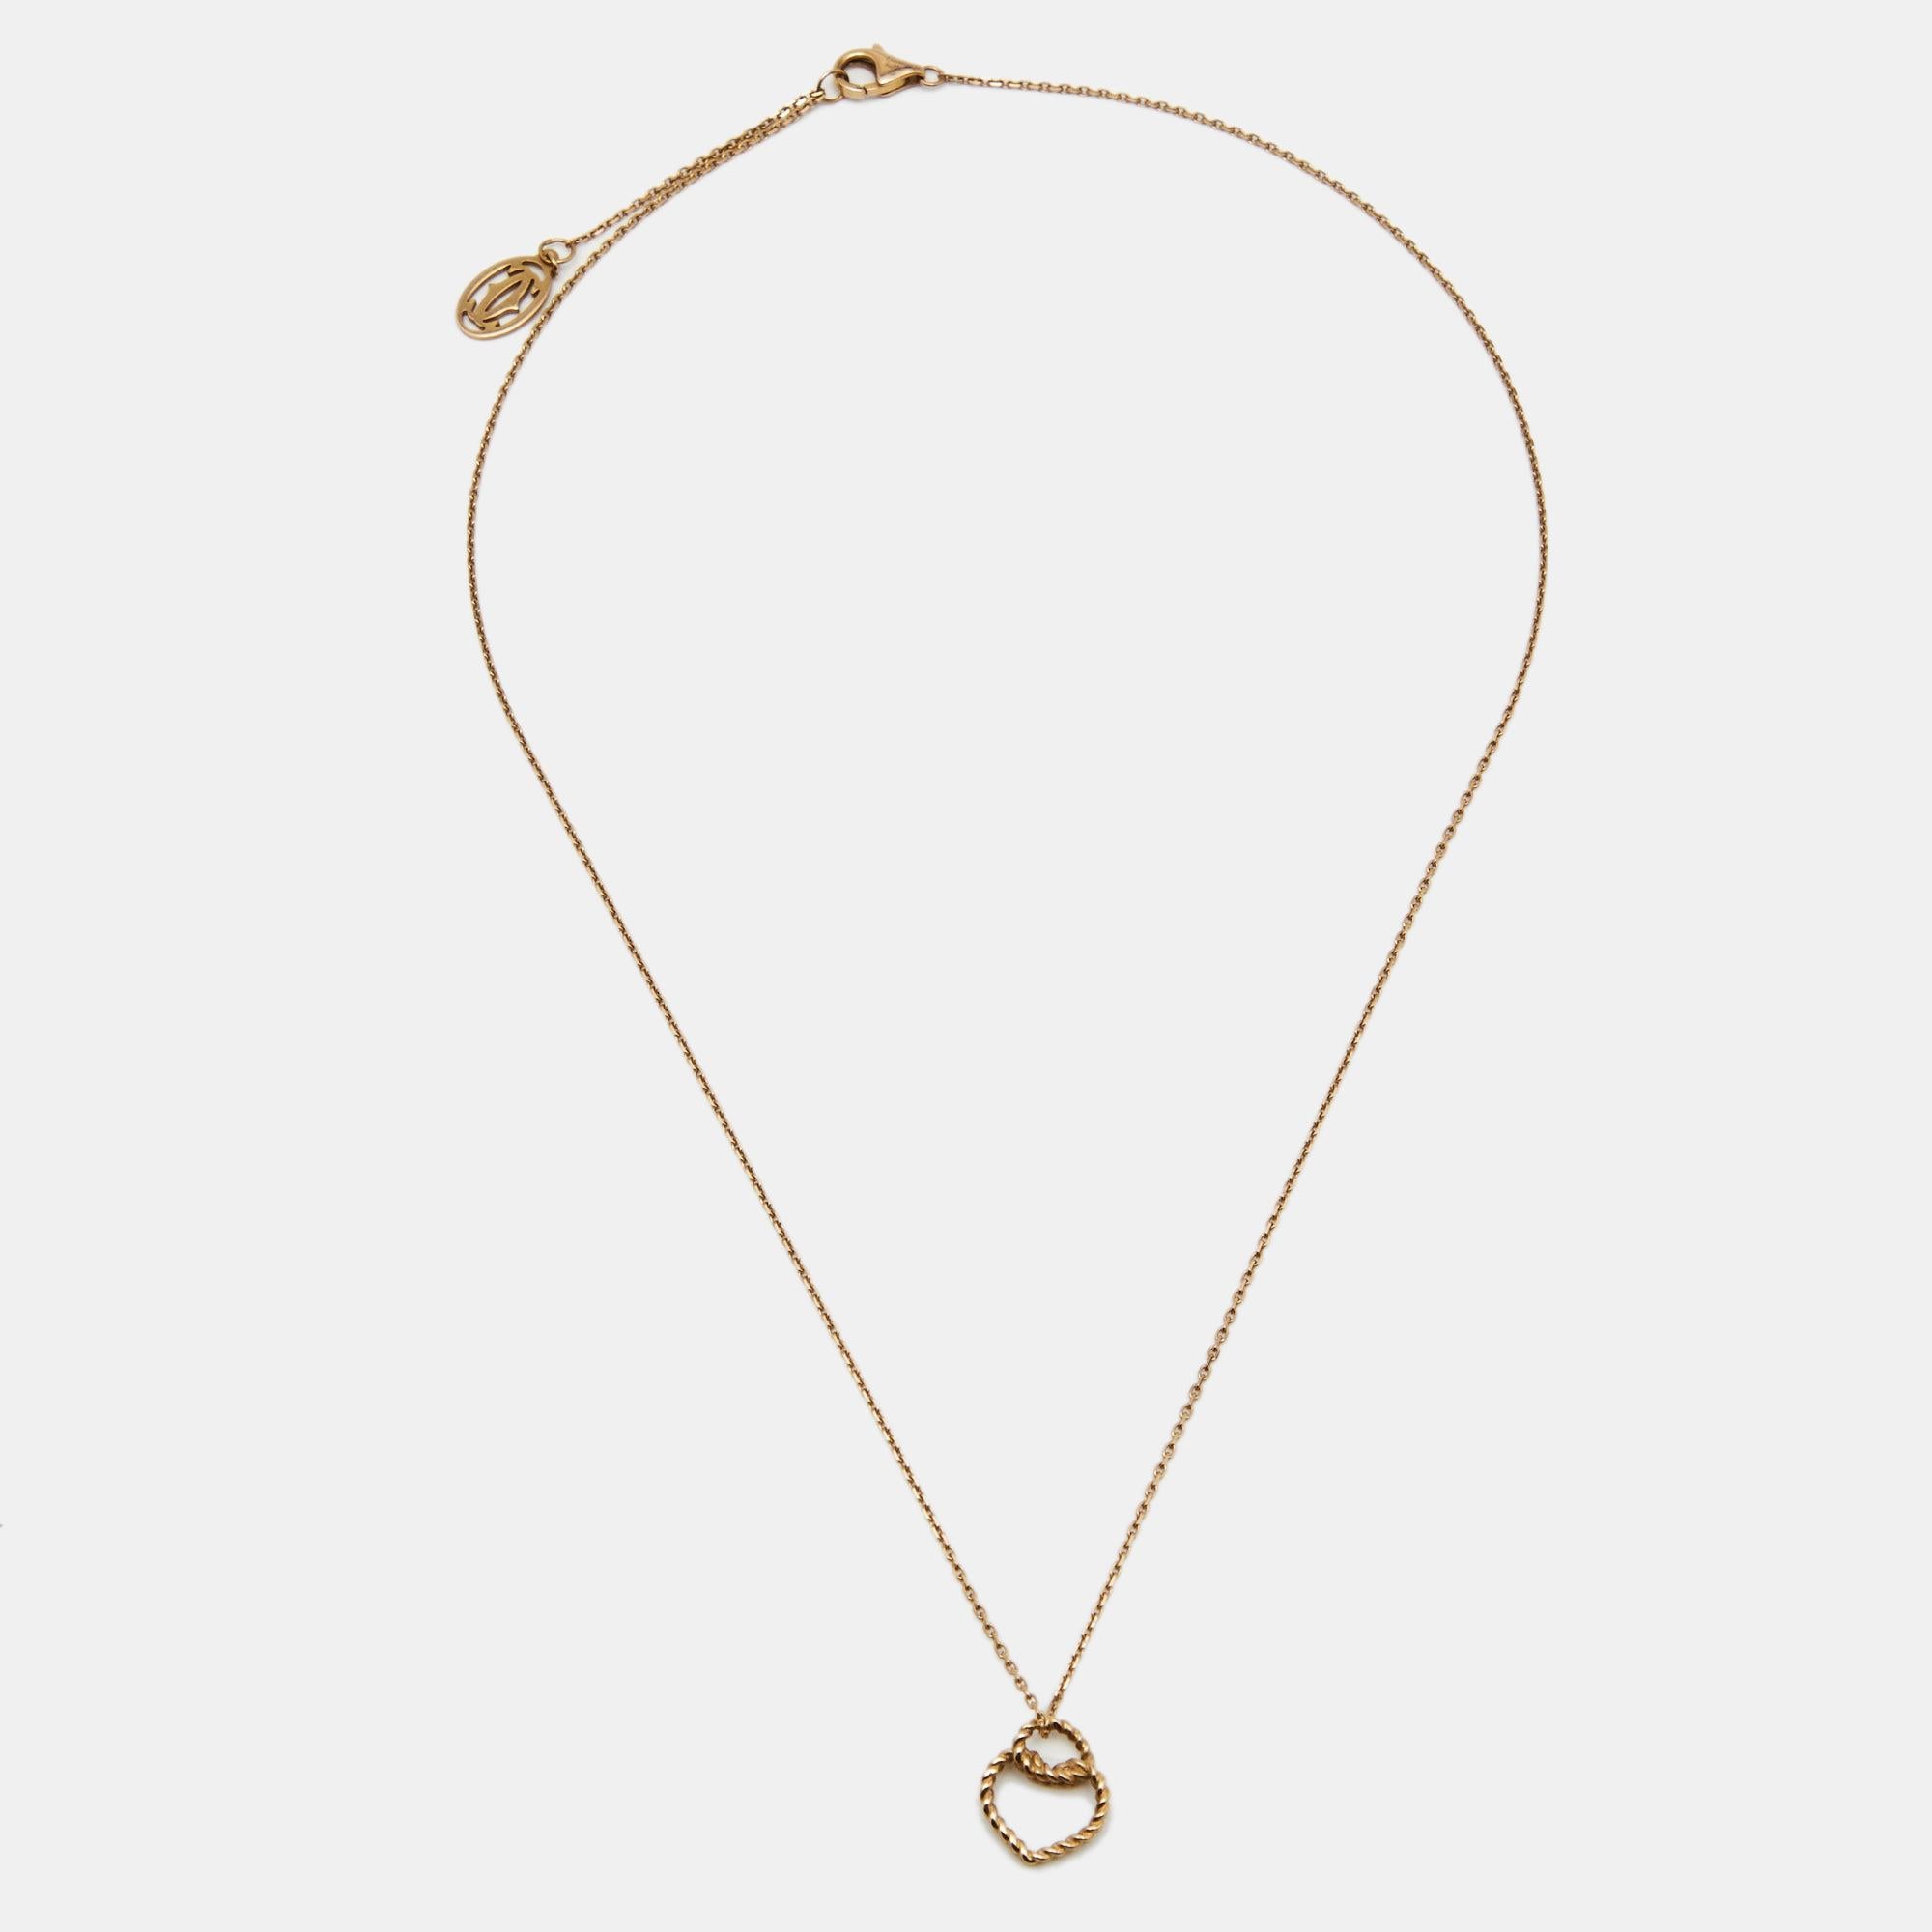 This Coeur Torsadé De Cartier necklace is a fine piece to wear solo or for layering with other neckpieces. The necklace is crafted from 18k rose gold, and the simple chain holds a twisted heart pendant.

